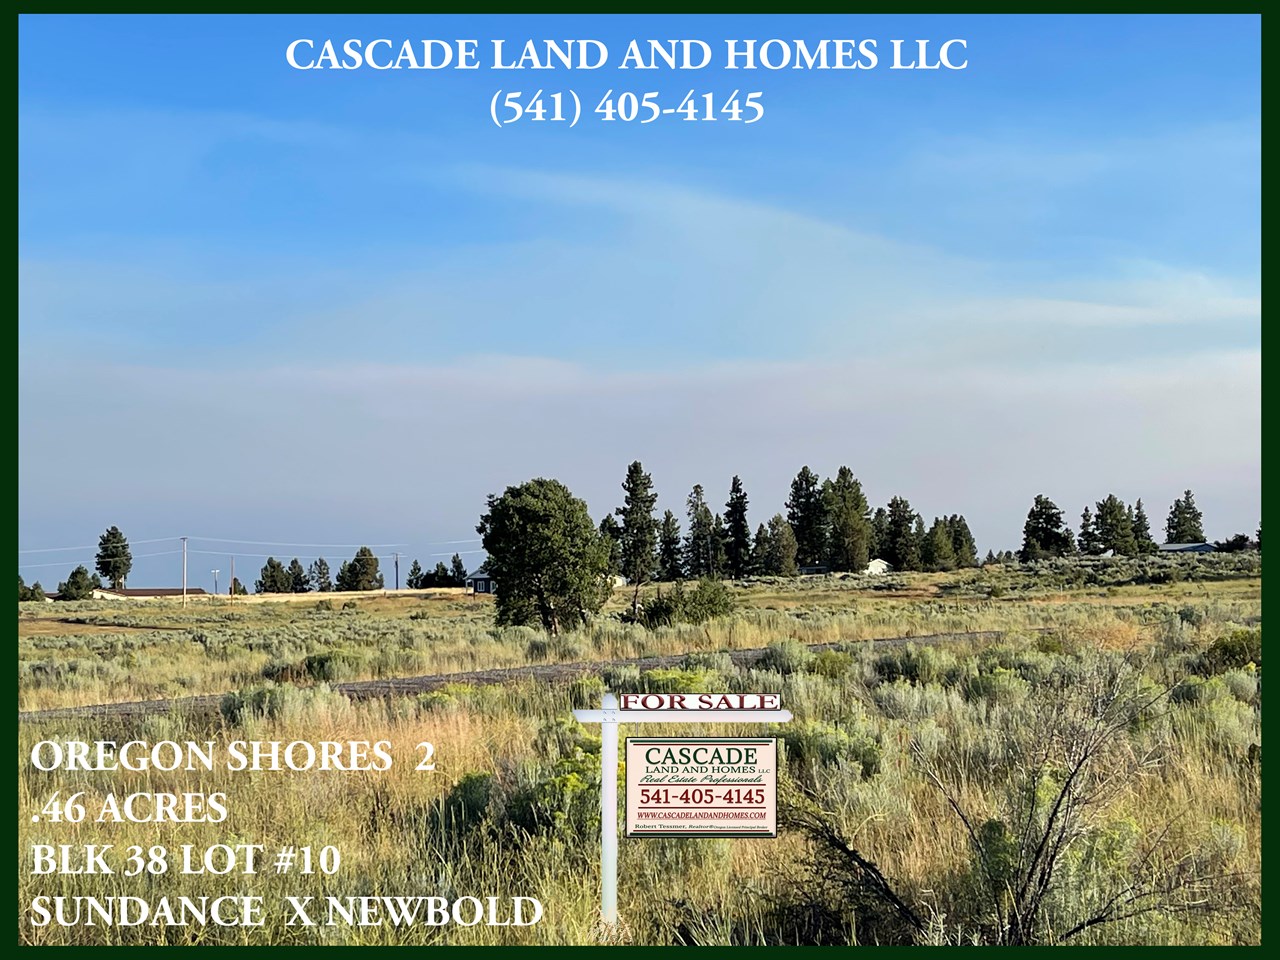 this is a perfect place for your new home if you want to be away from the city, be surrounded by wilderness, and  have unlimited outdoor recreational opportunities! you can have that here, and still live in a community with maintained roads and a few neighbors.